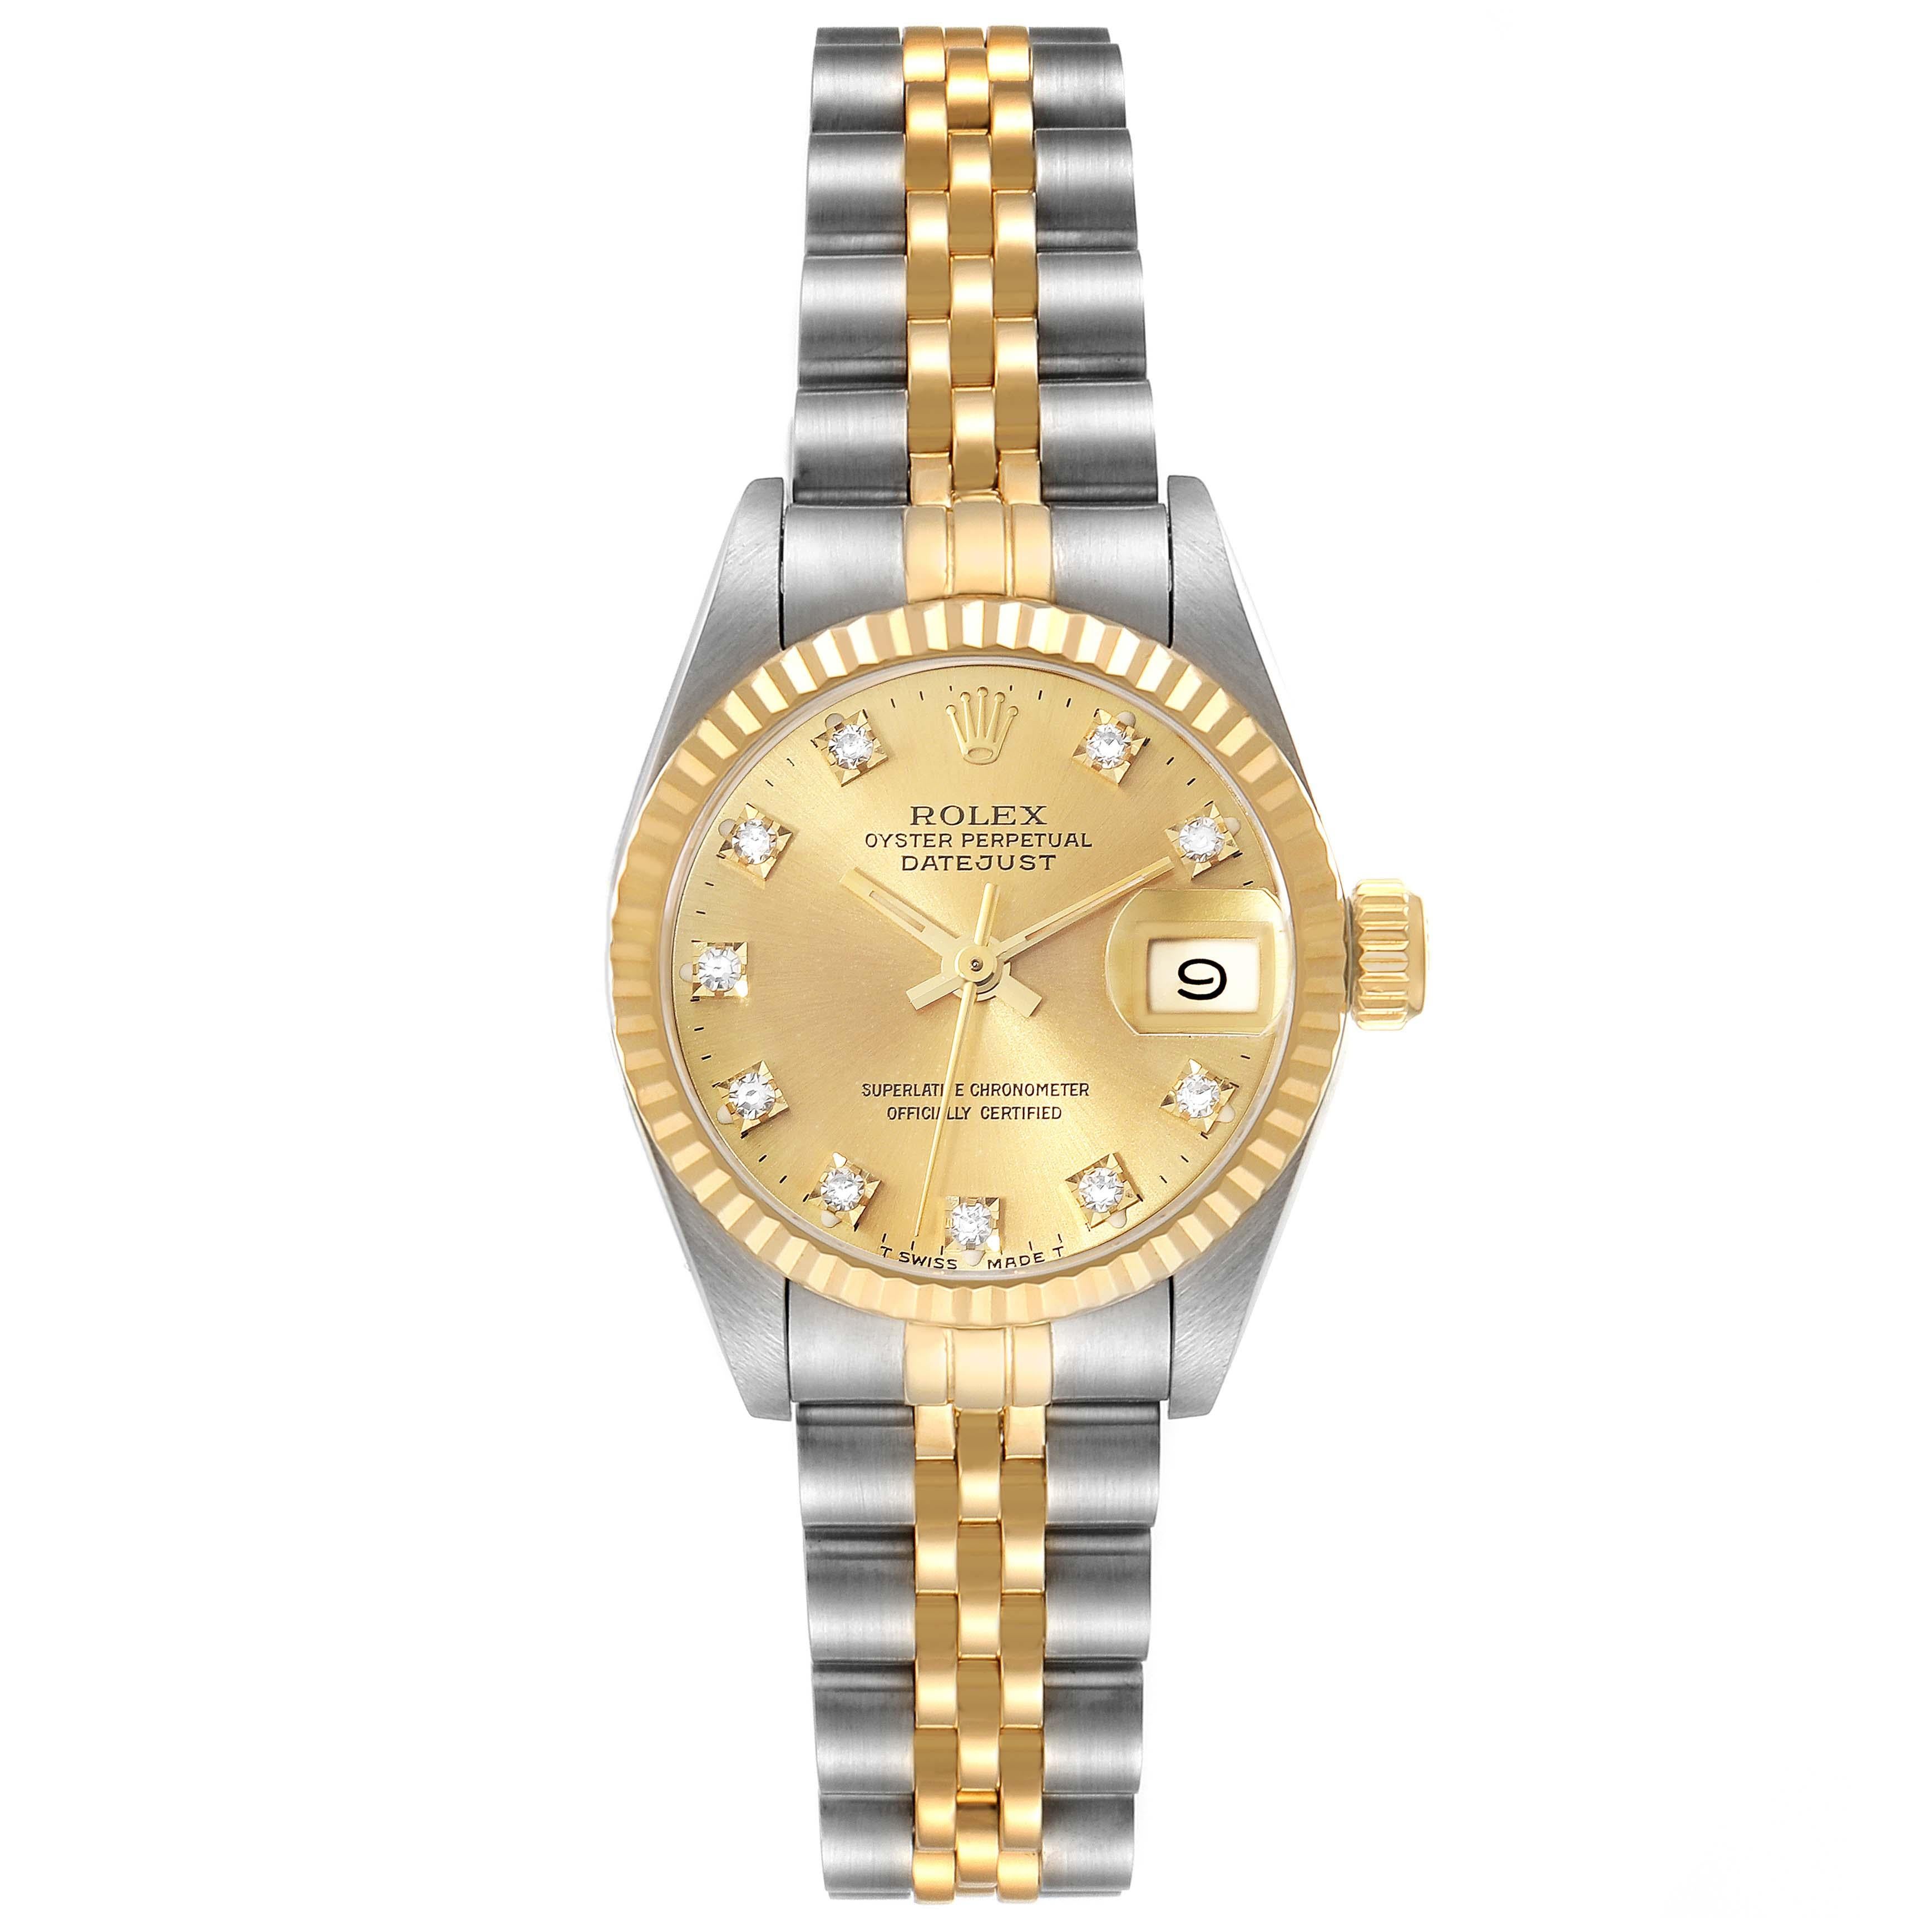 Rolex Datejust Steel Yellow Gold Champagne Diamond Dial Ladies Watch 69173. Officially certified chronometer automatic self-winding movement. Stainless steel oyster case 26.0 mm in diameter. Rolex logo on the crown. 18k yellow gold fluted bezel.